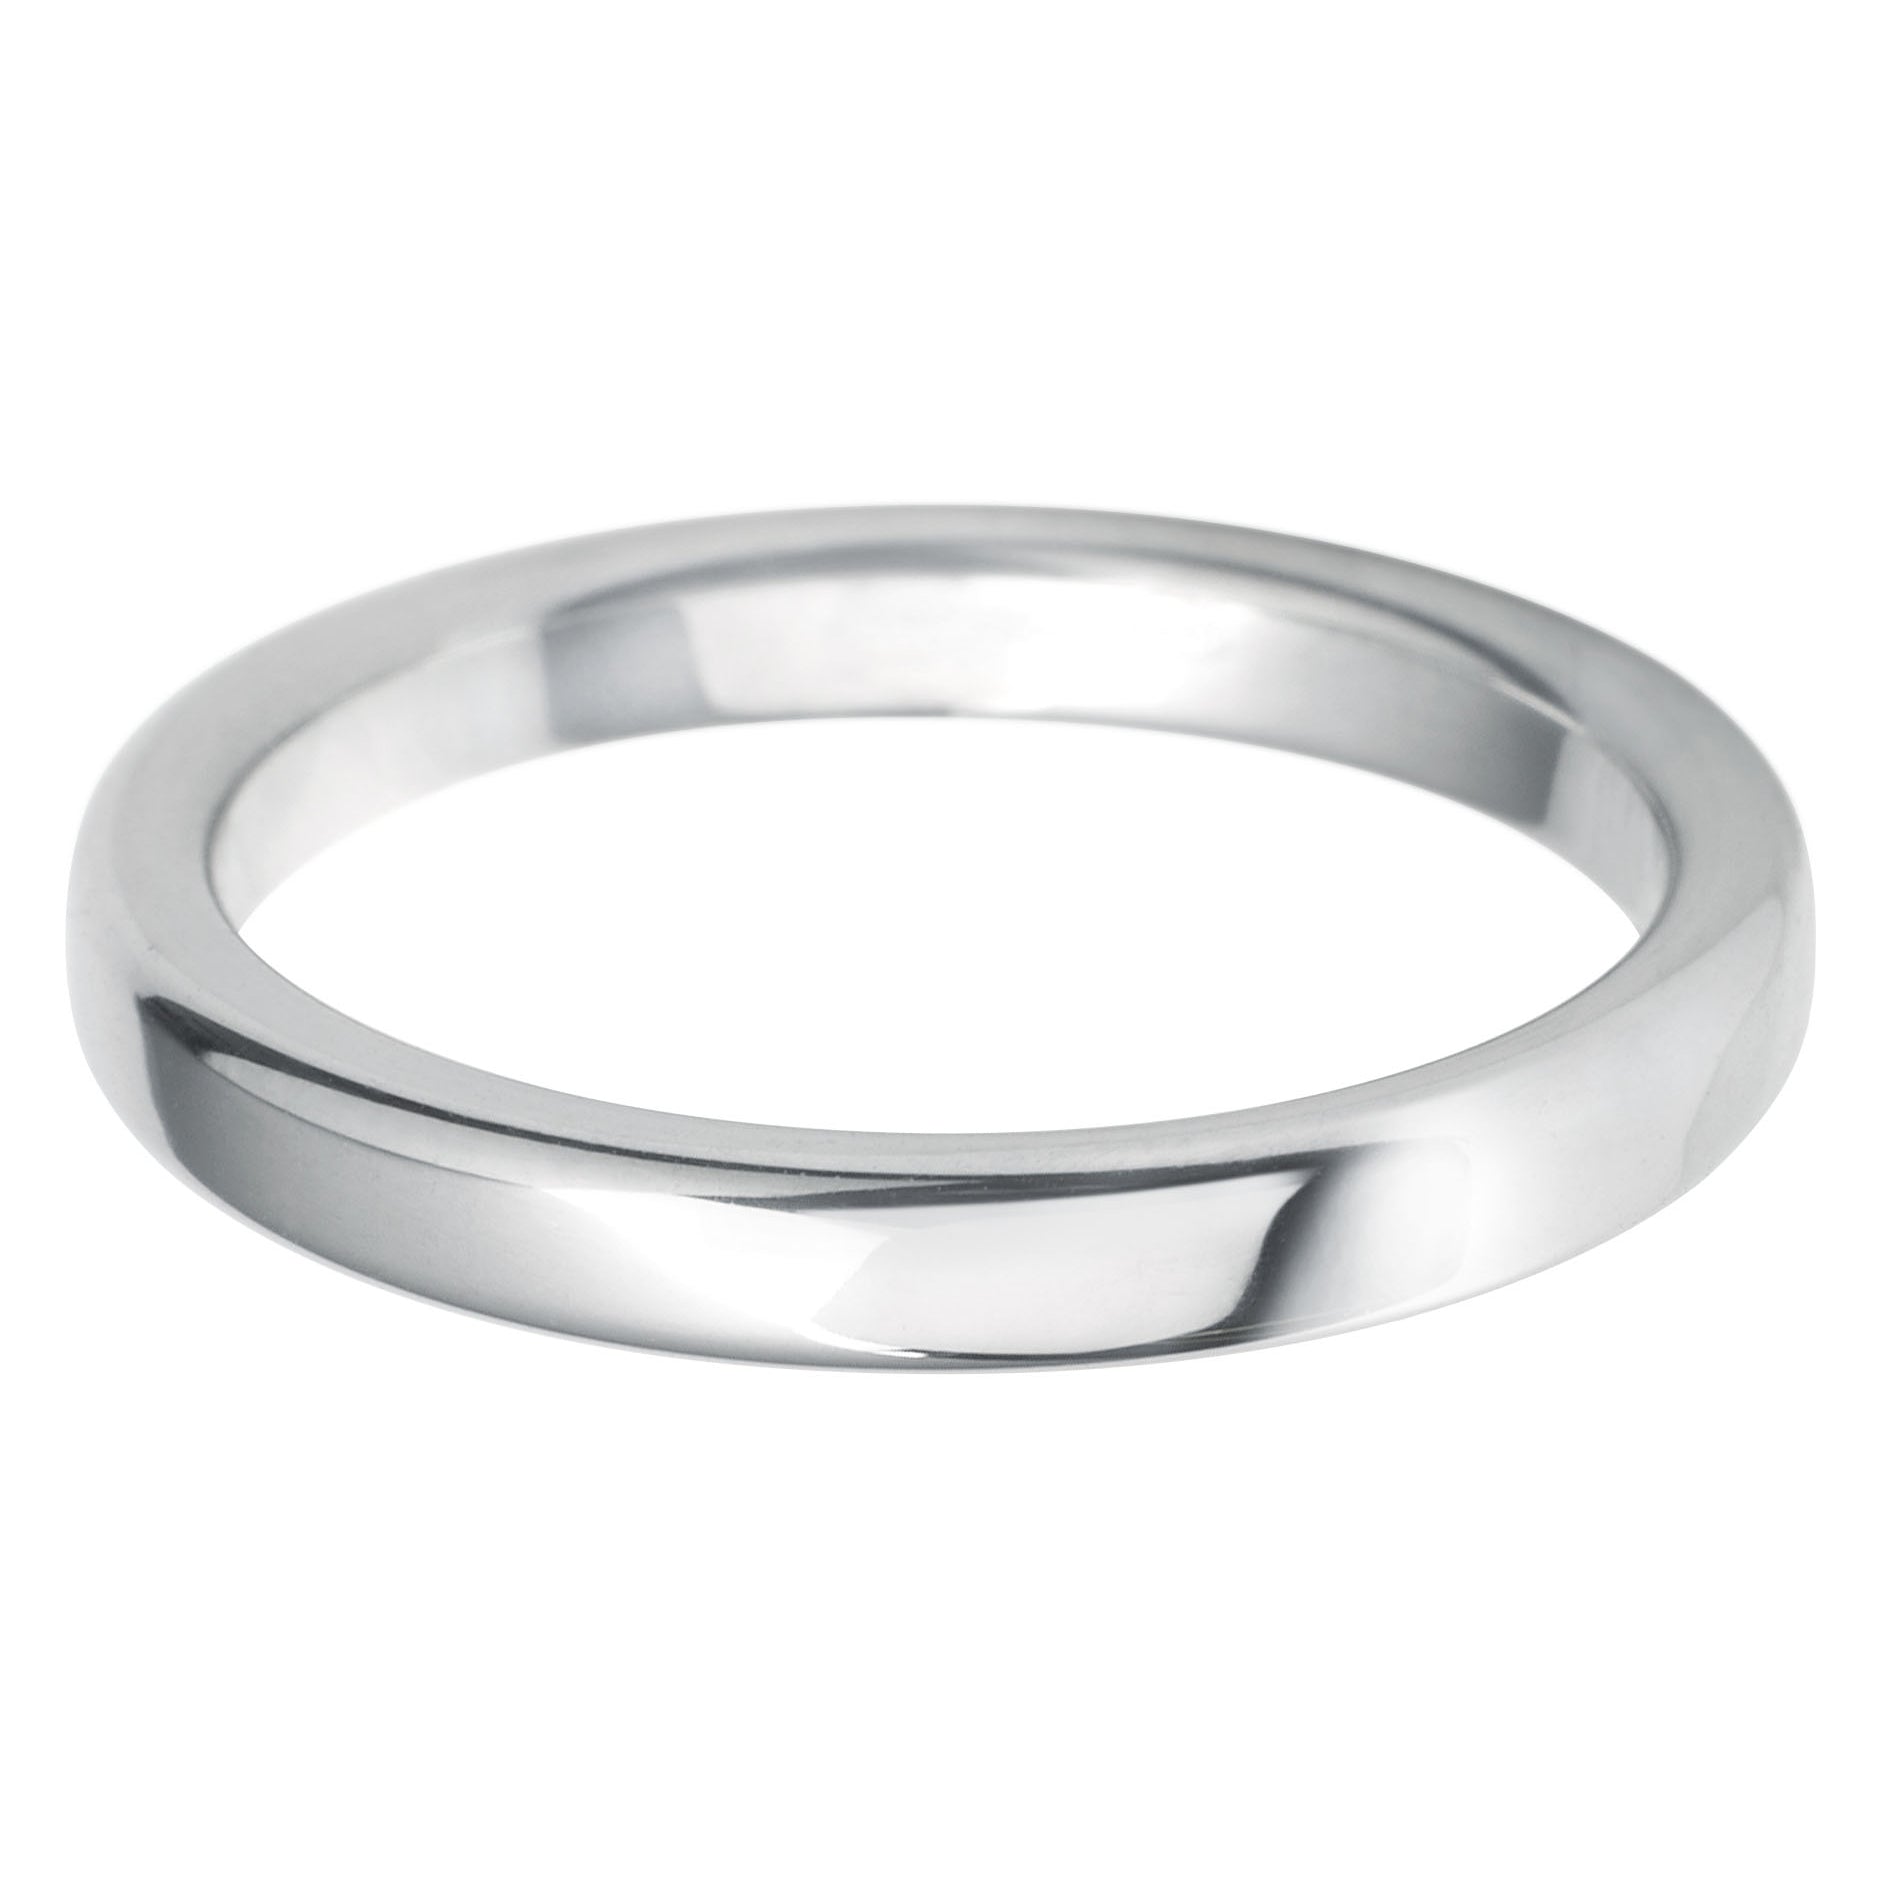 2.5mm Rounded Flat lightweight Wedding Ring